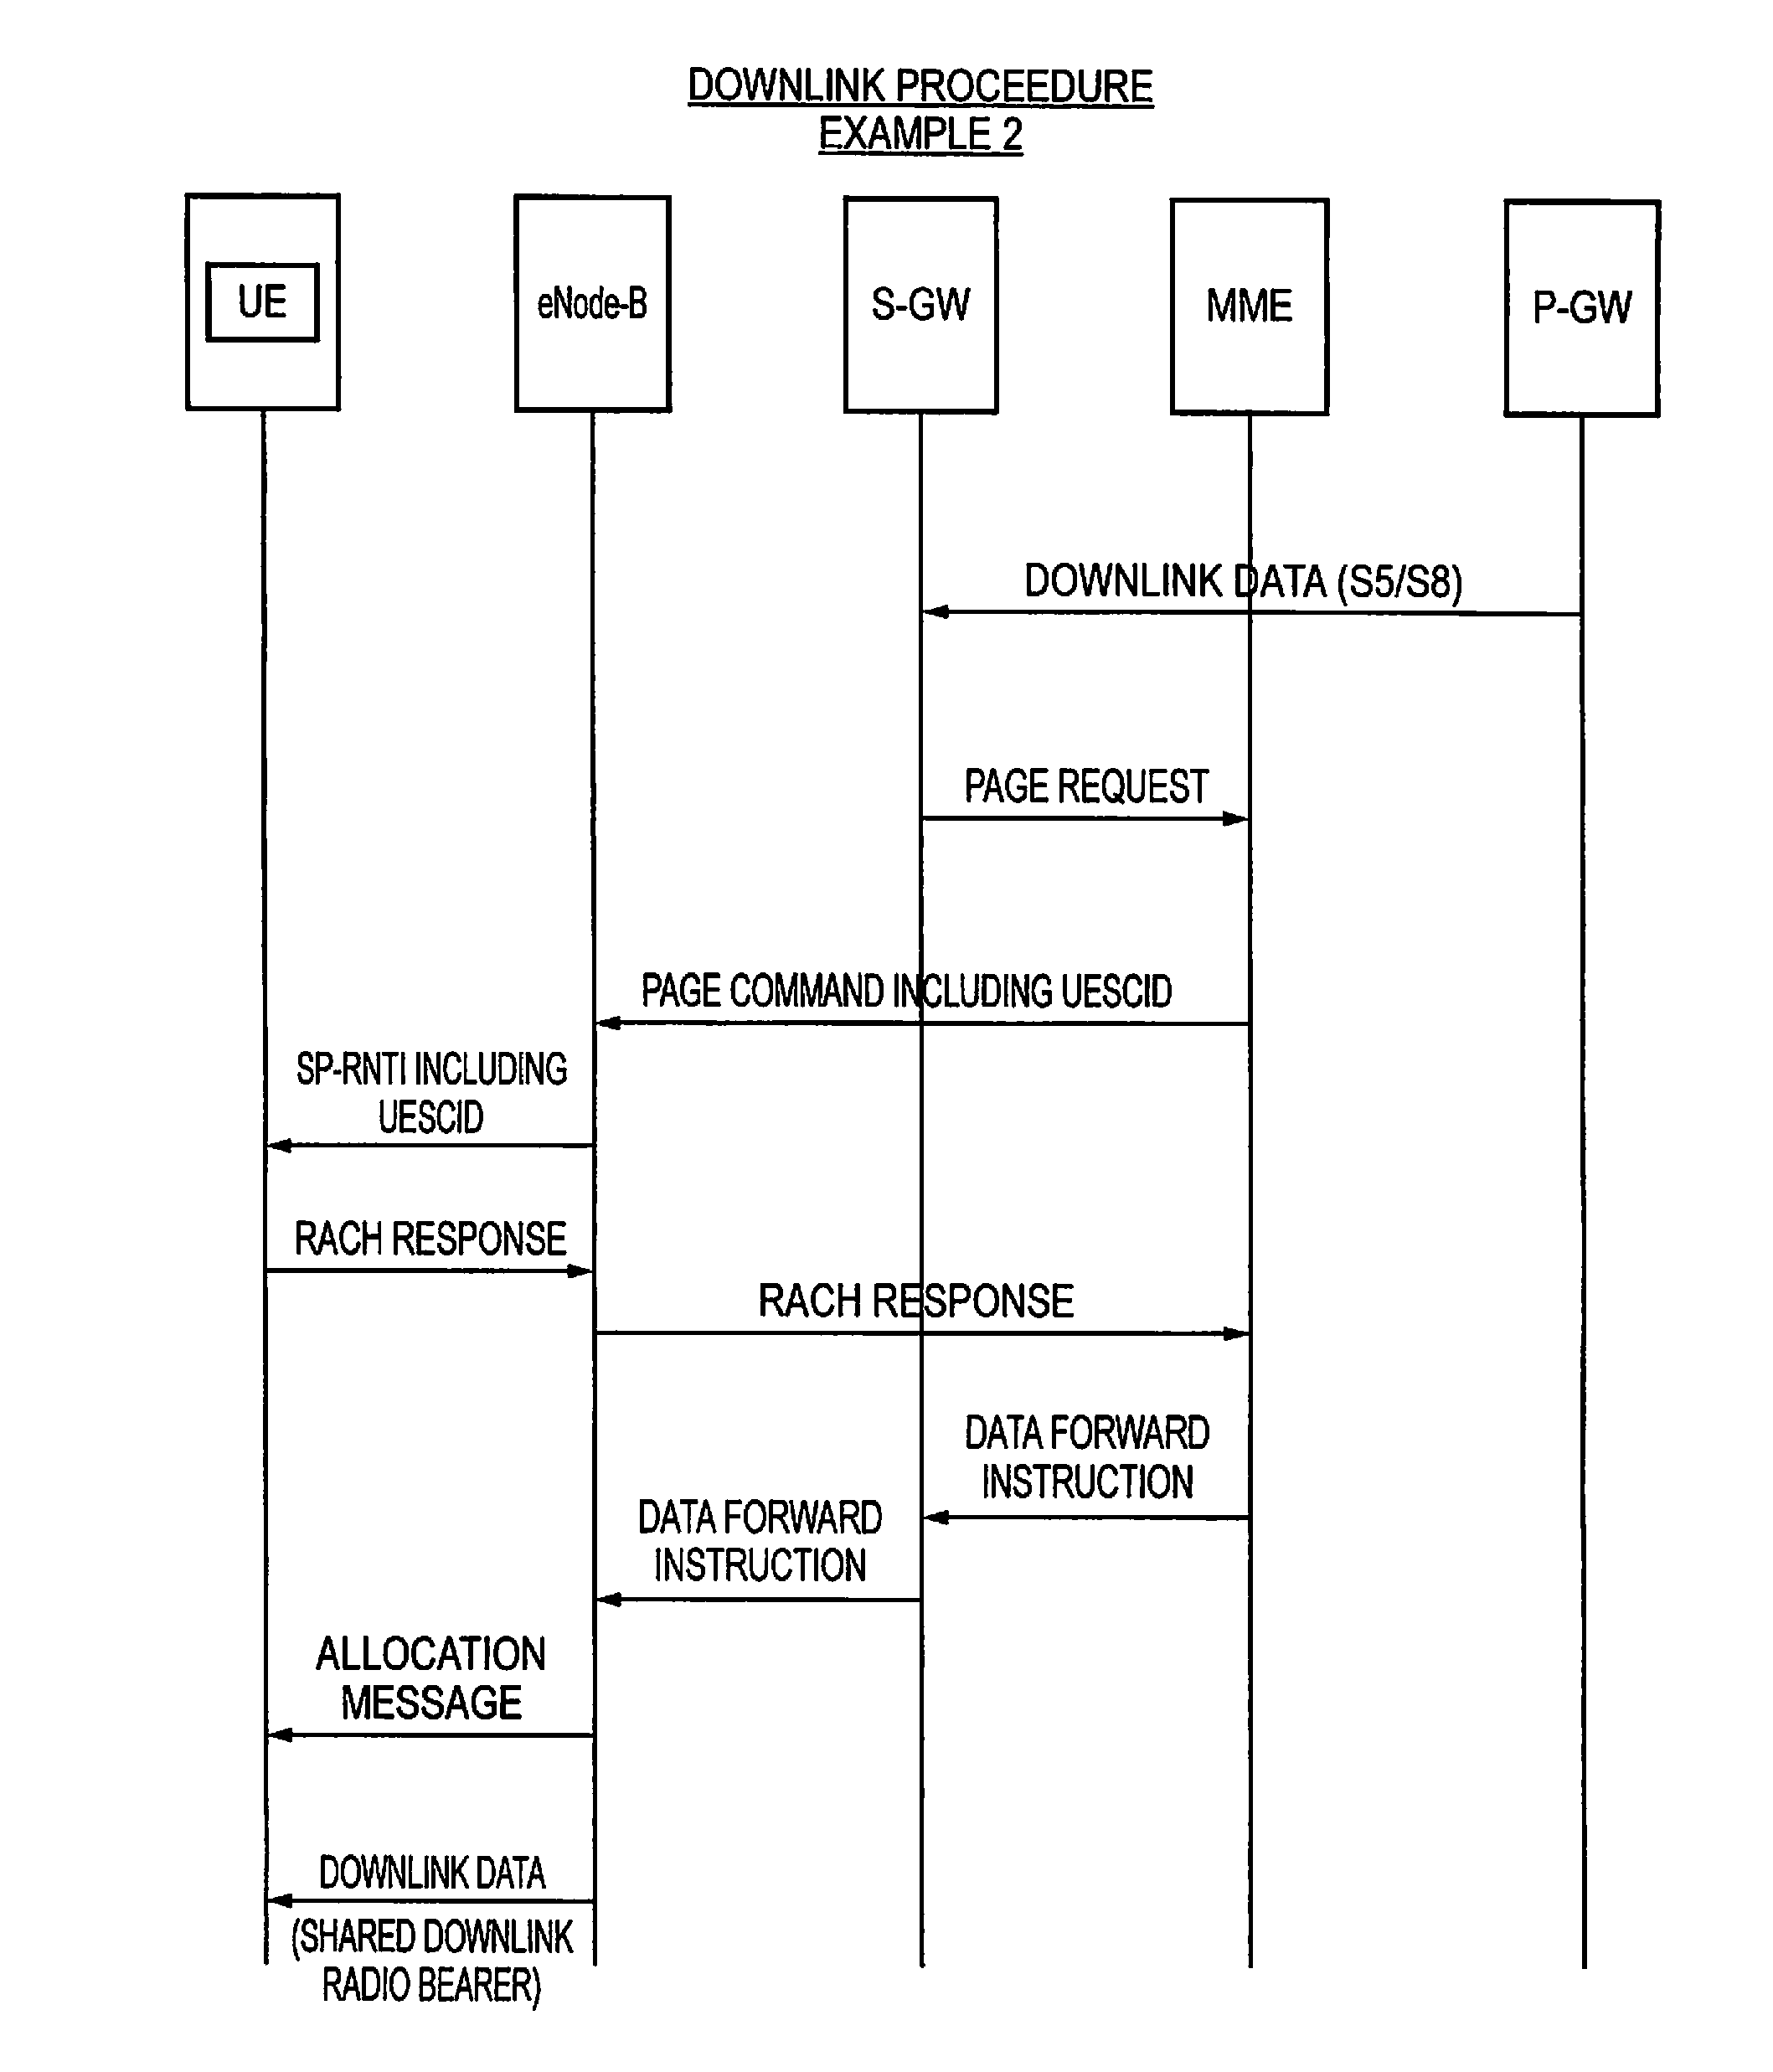 Managing operating parameters for communication bearers in a wireless network